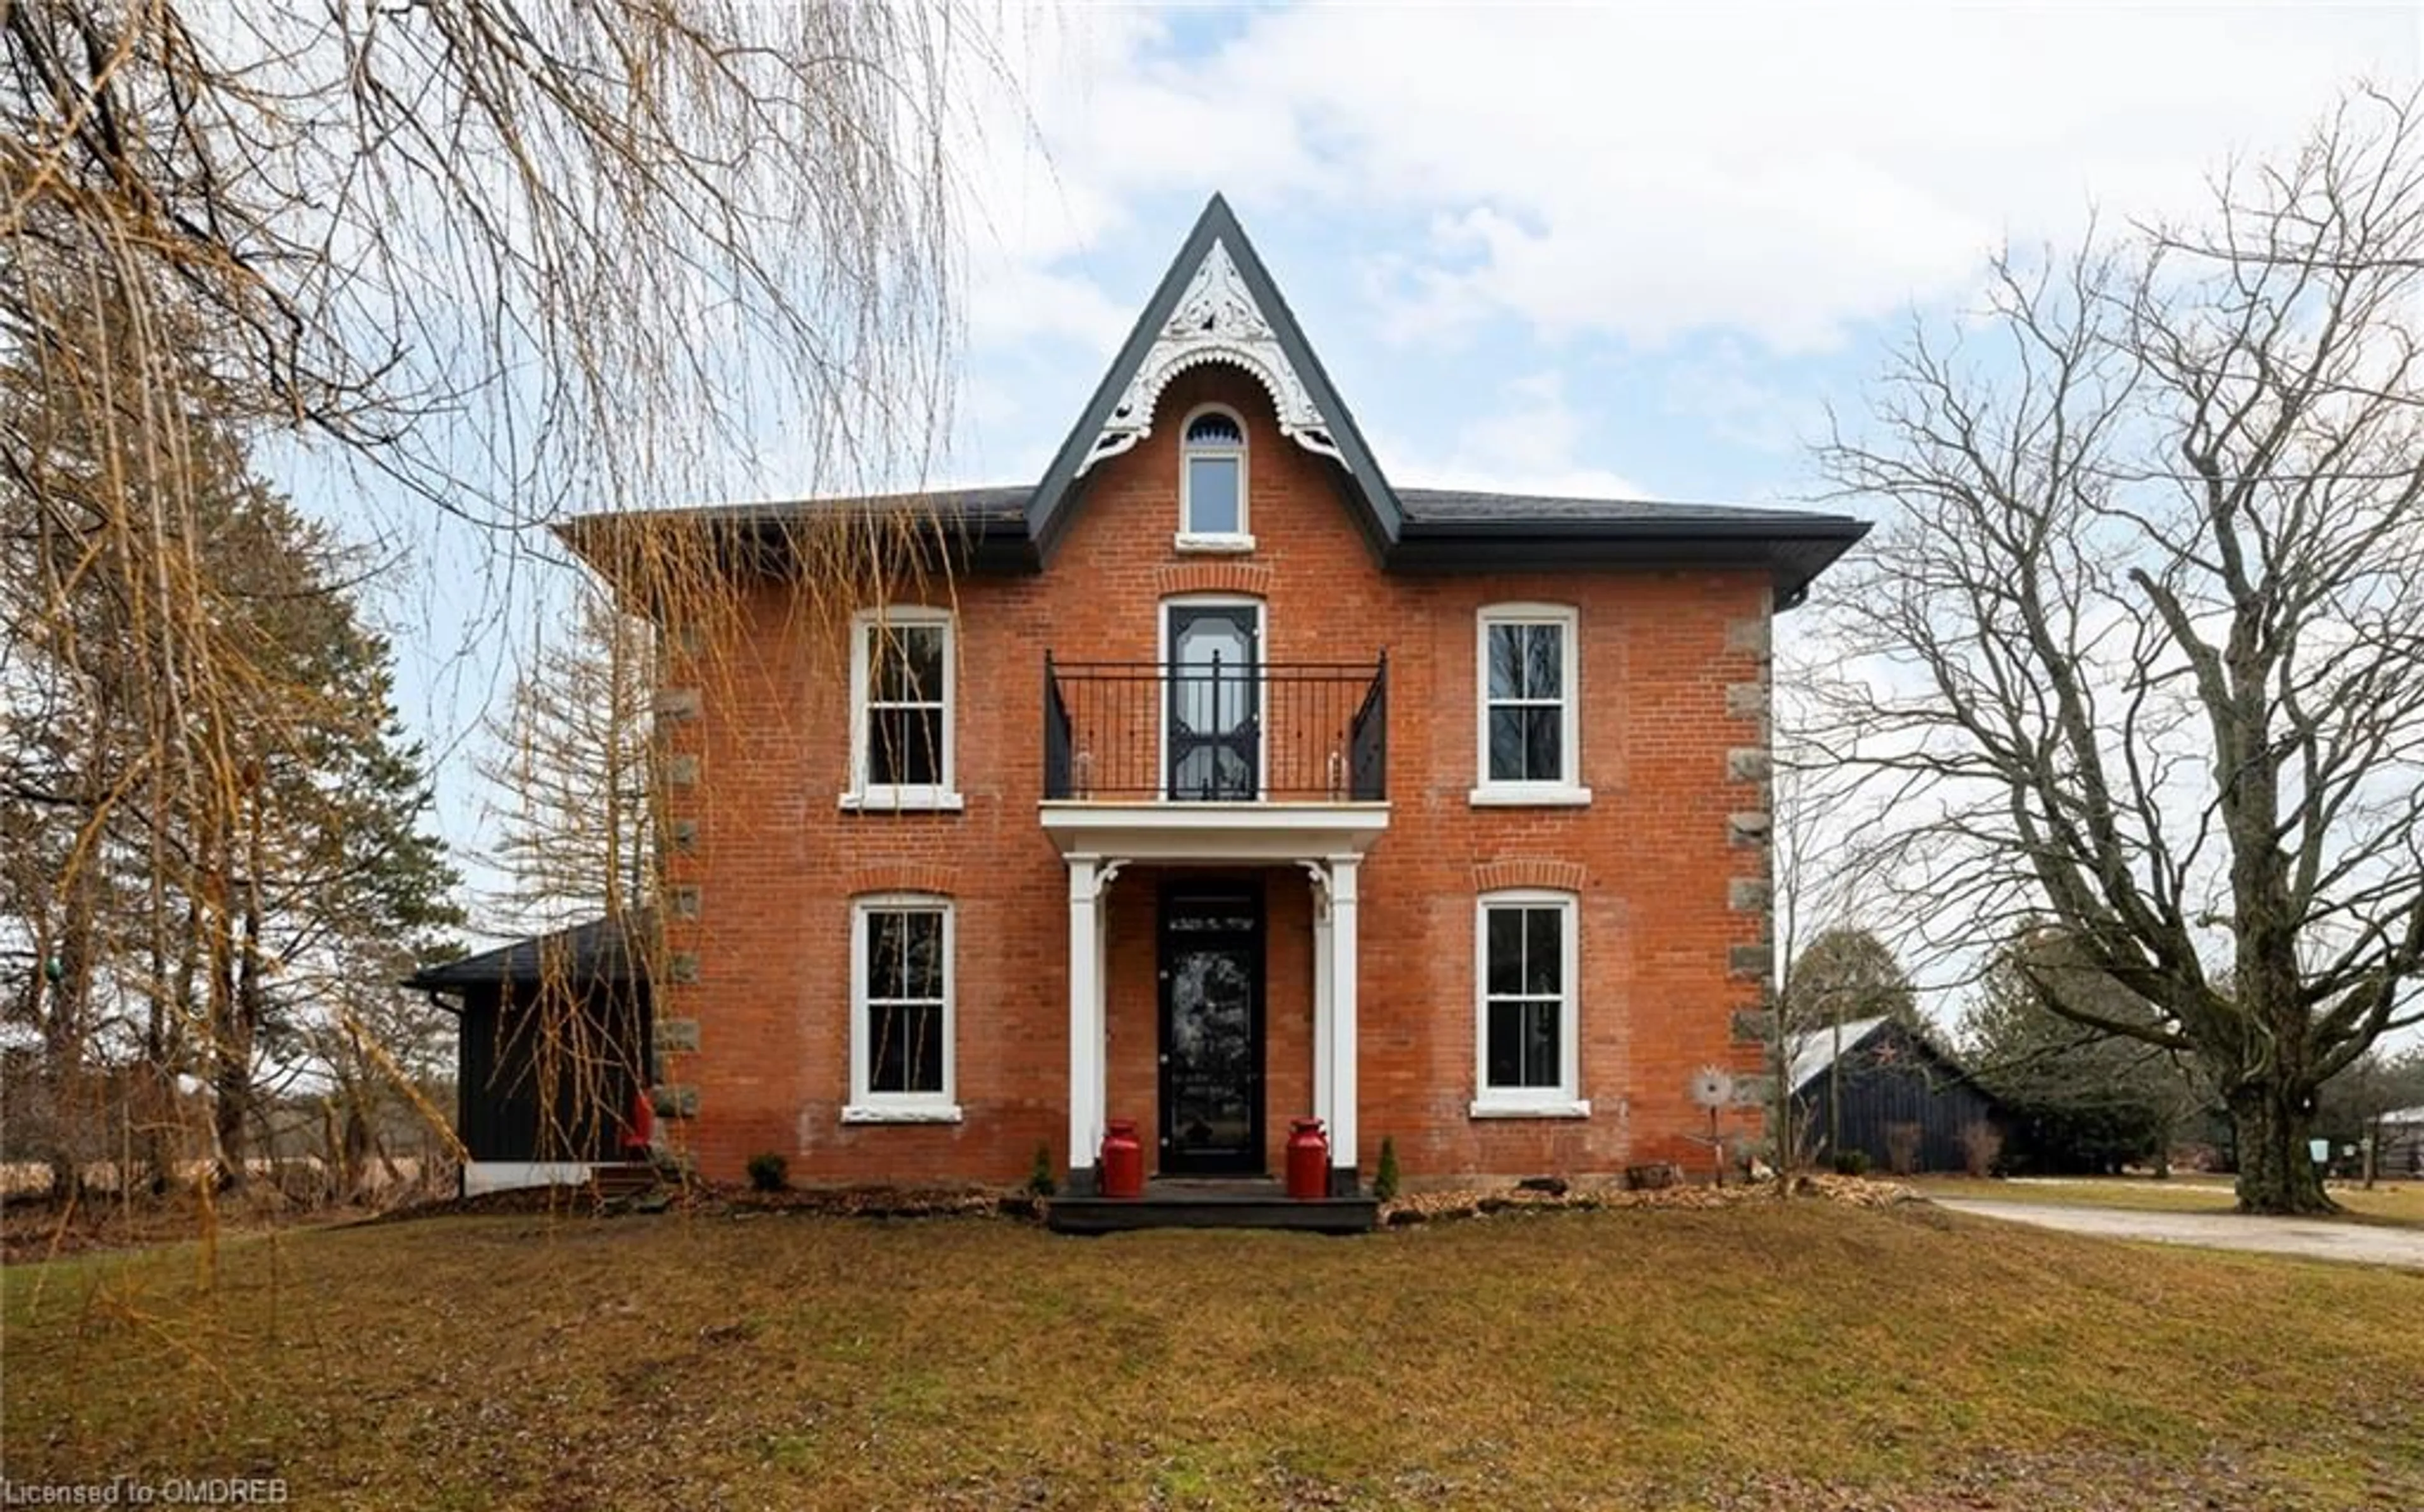 Home with brick exterior material for 674217 Hurontario St, Mono Ontario L9W 5R9